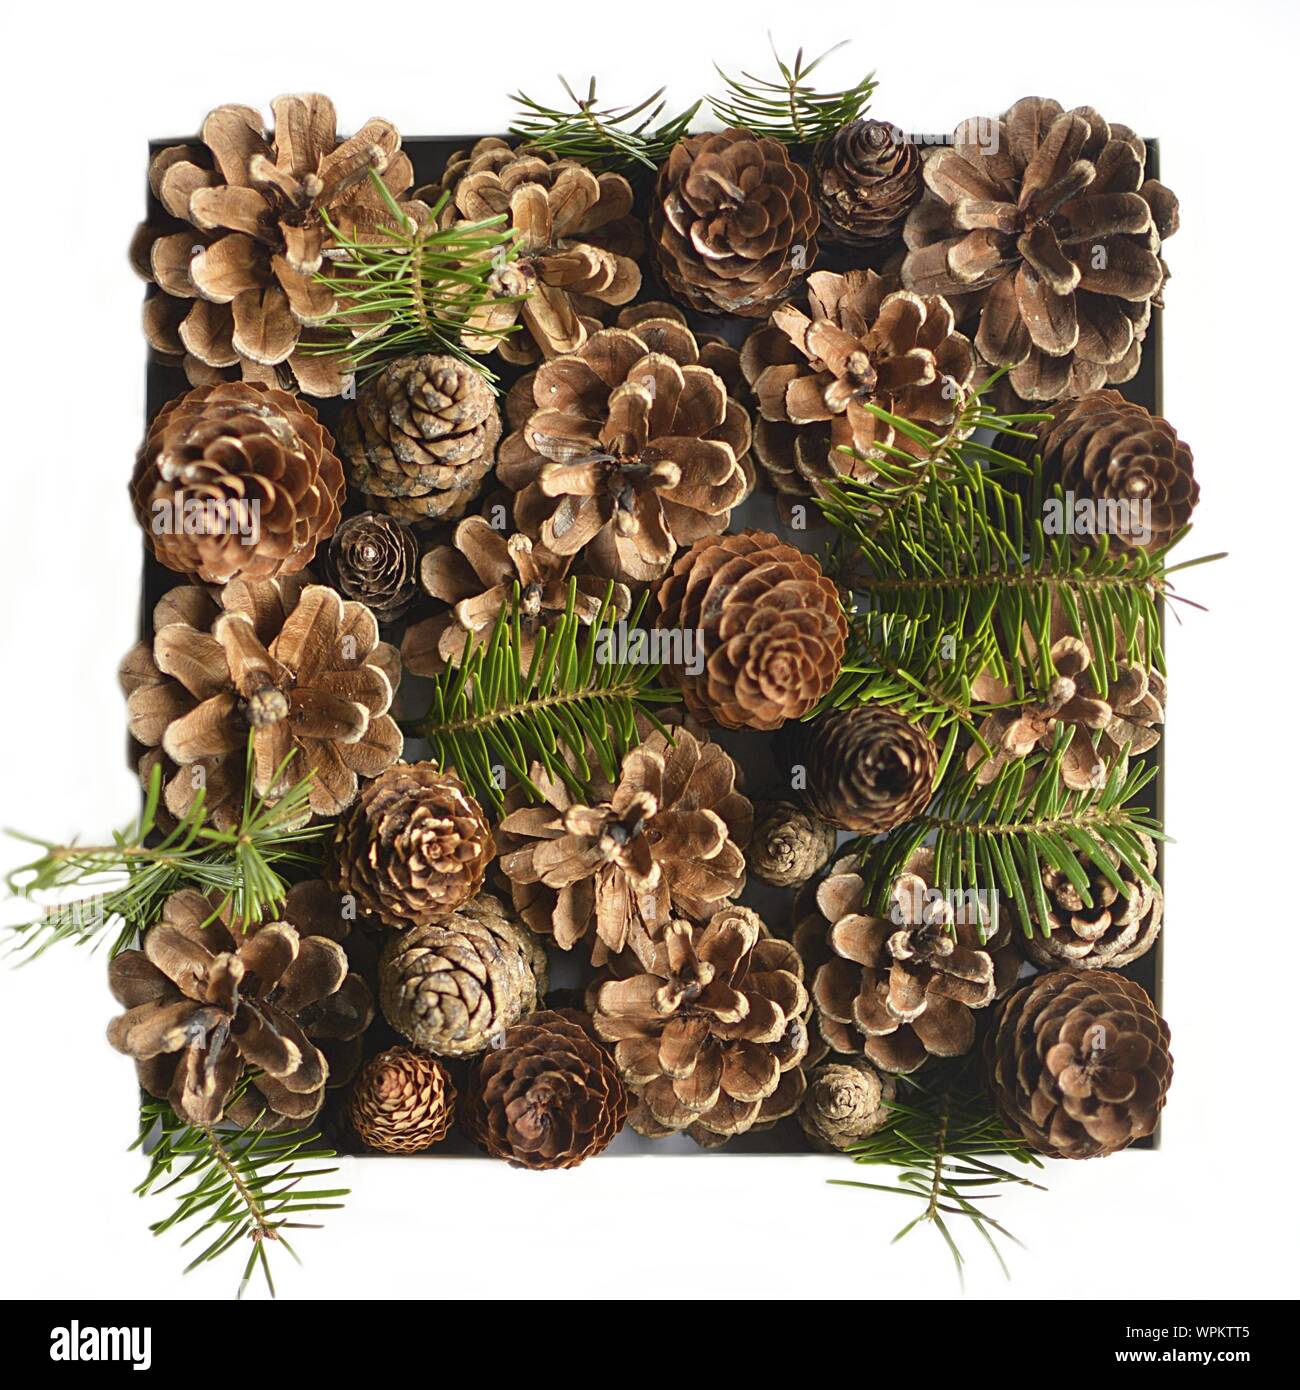 Christmas decoration made of pine cones Stock Photo